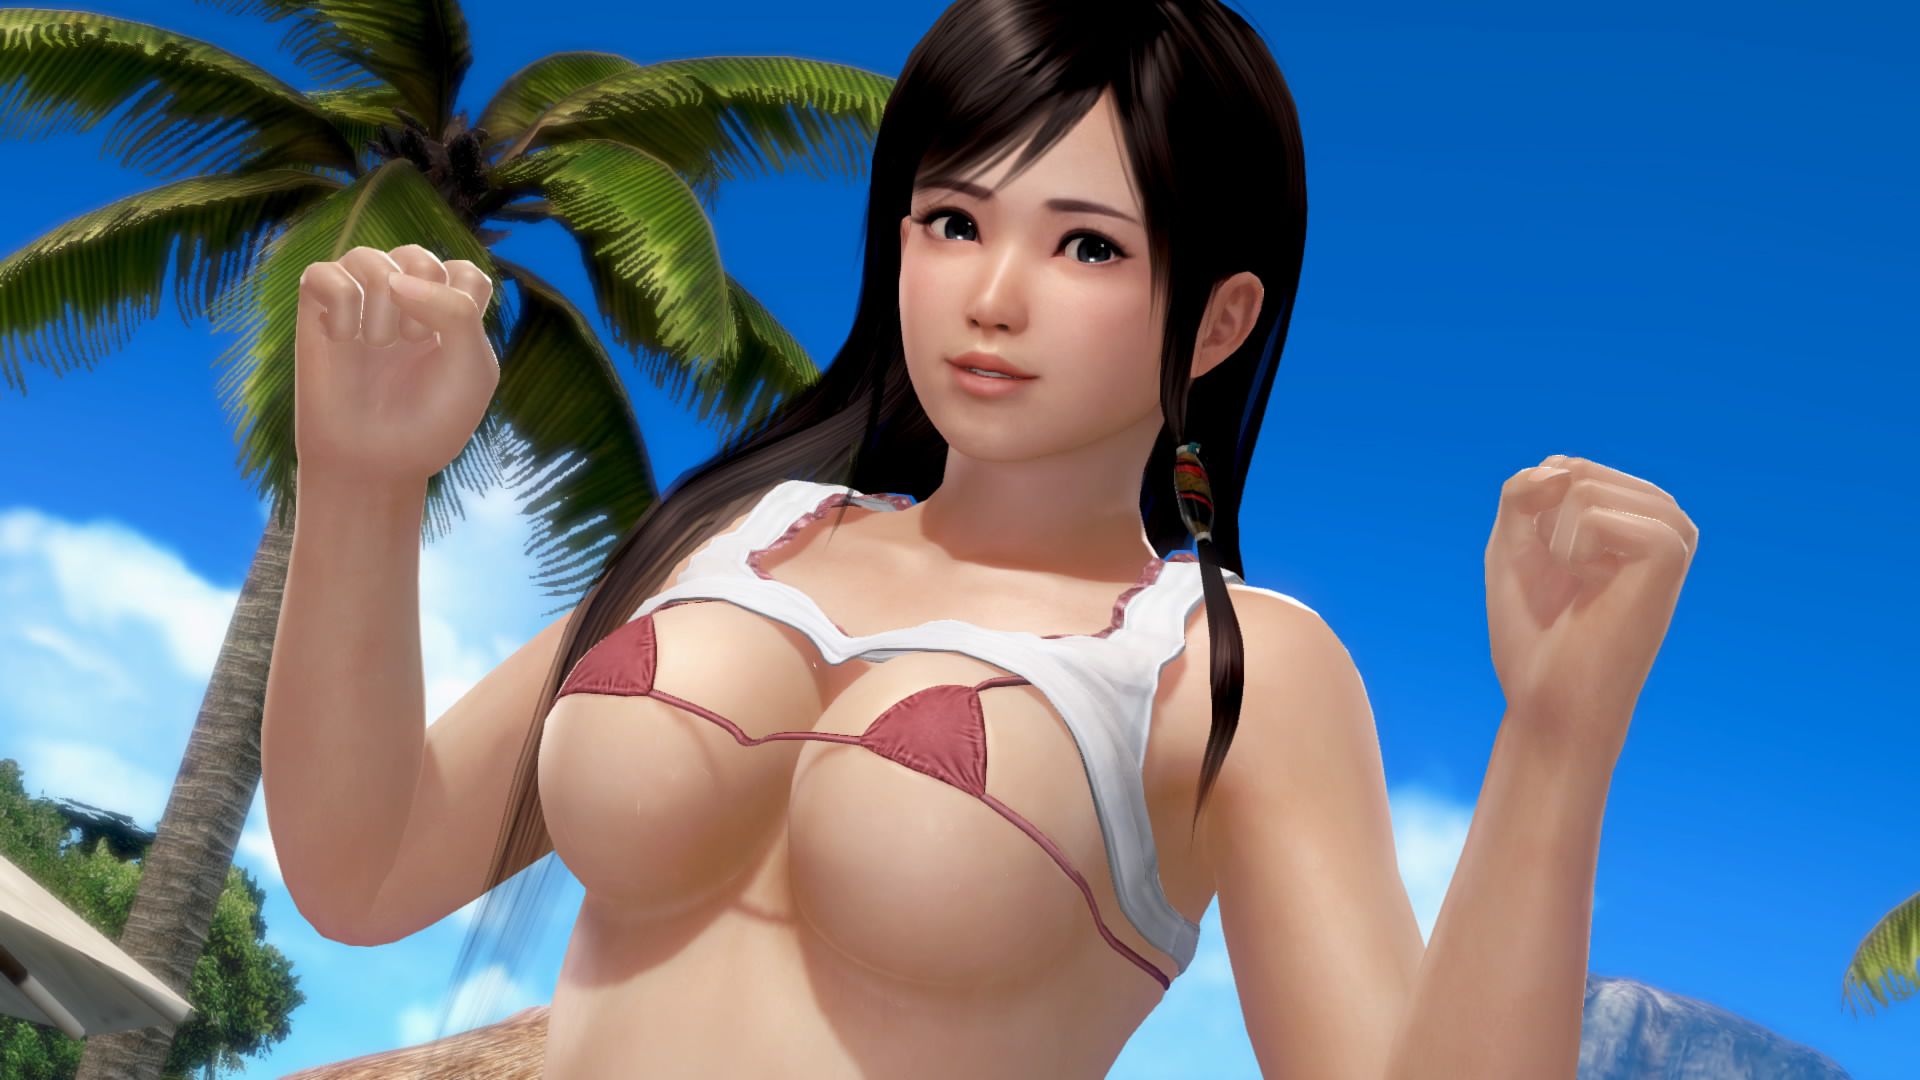 DOAX3 heart has a cute neat and clean system bitch 19